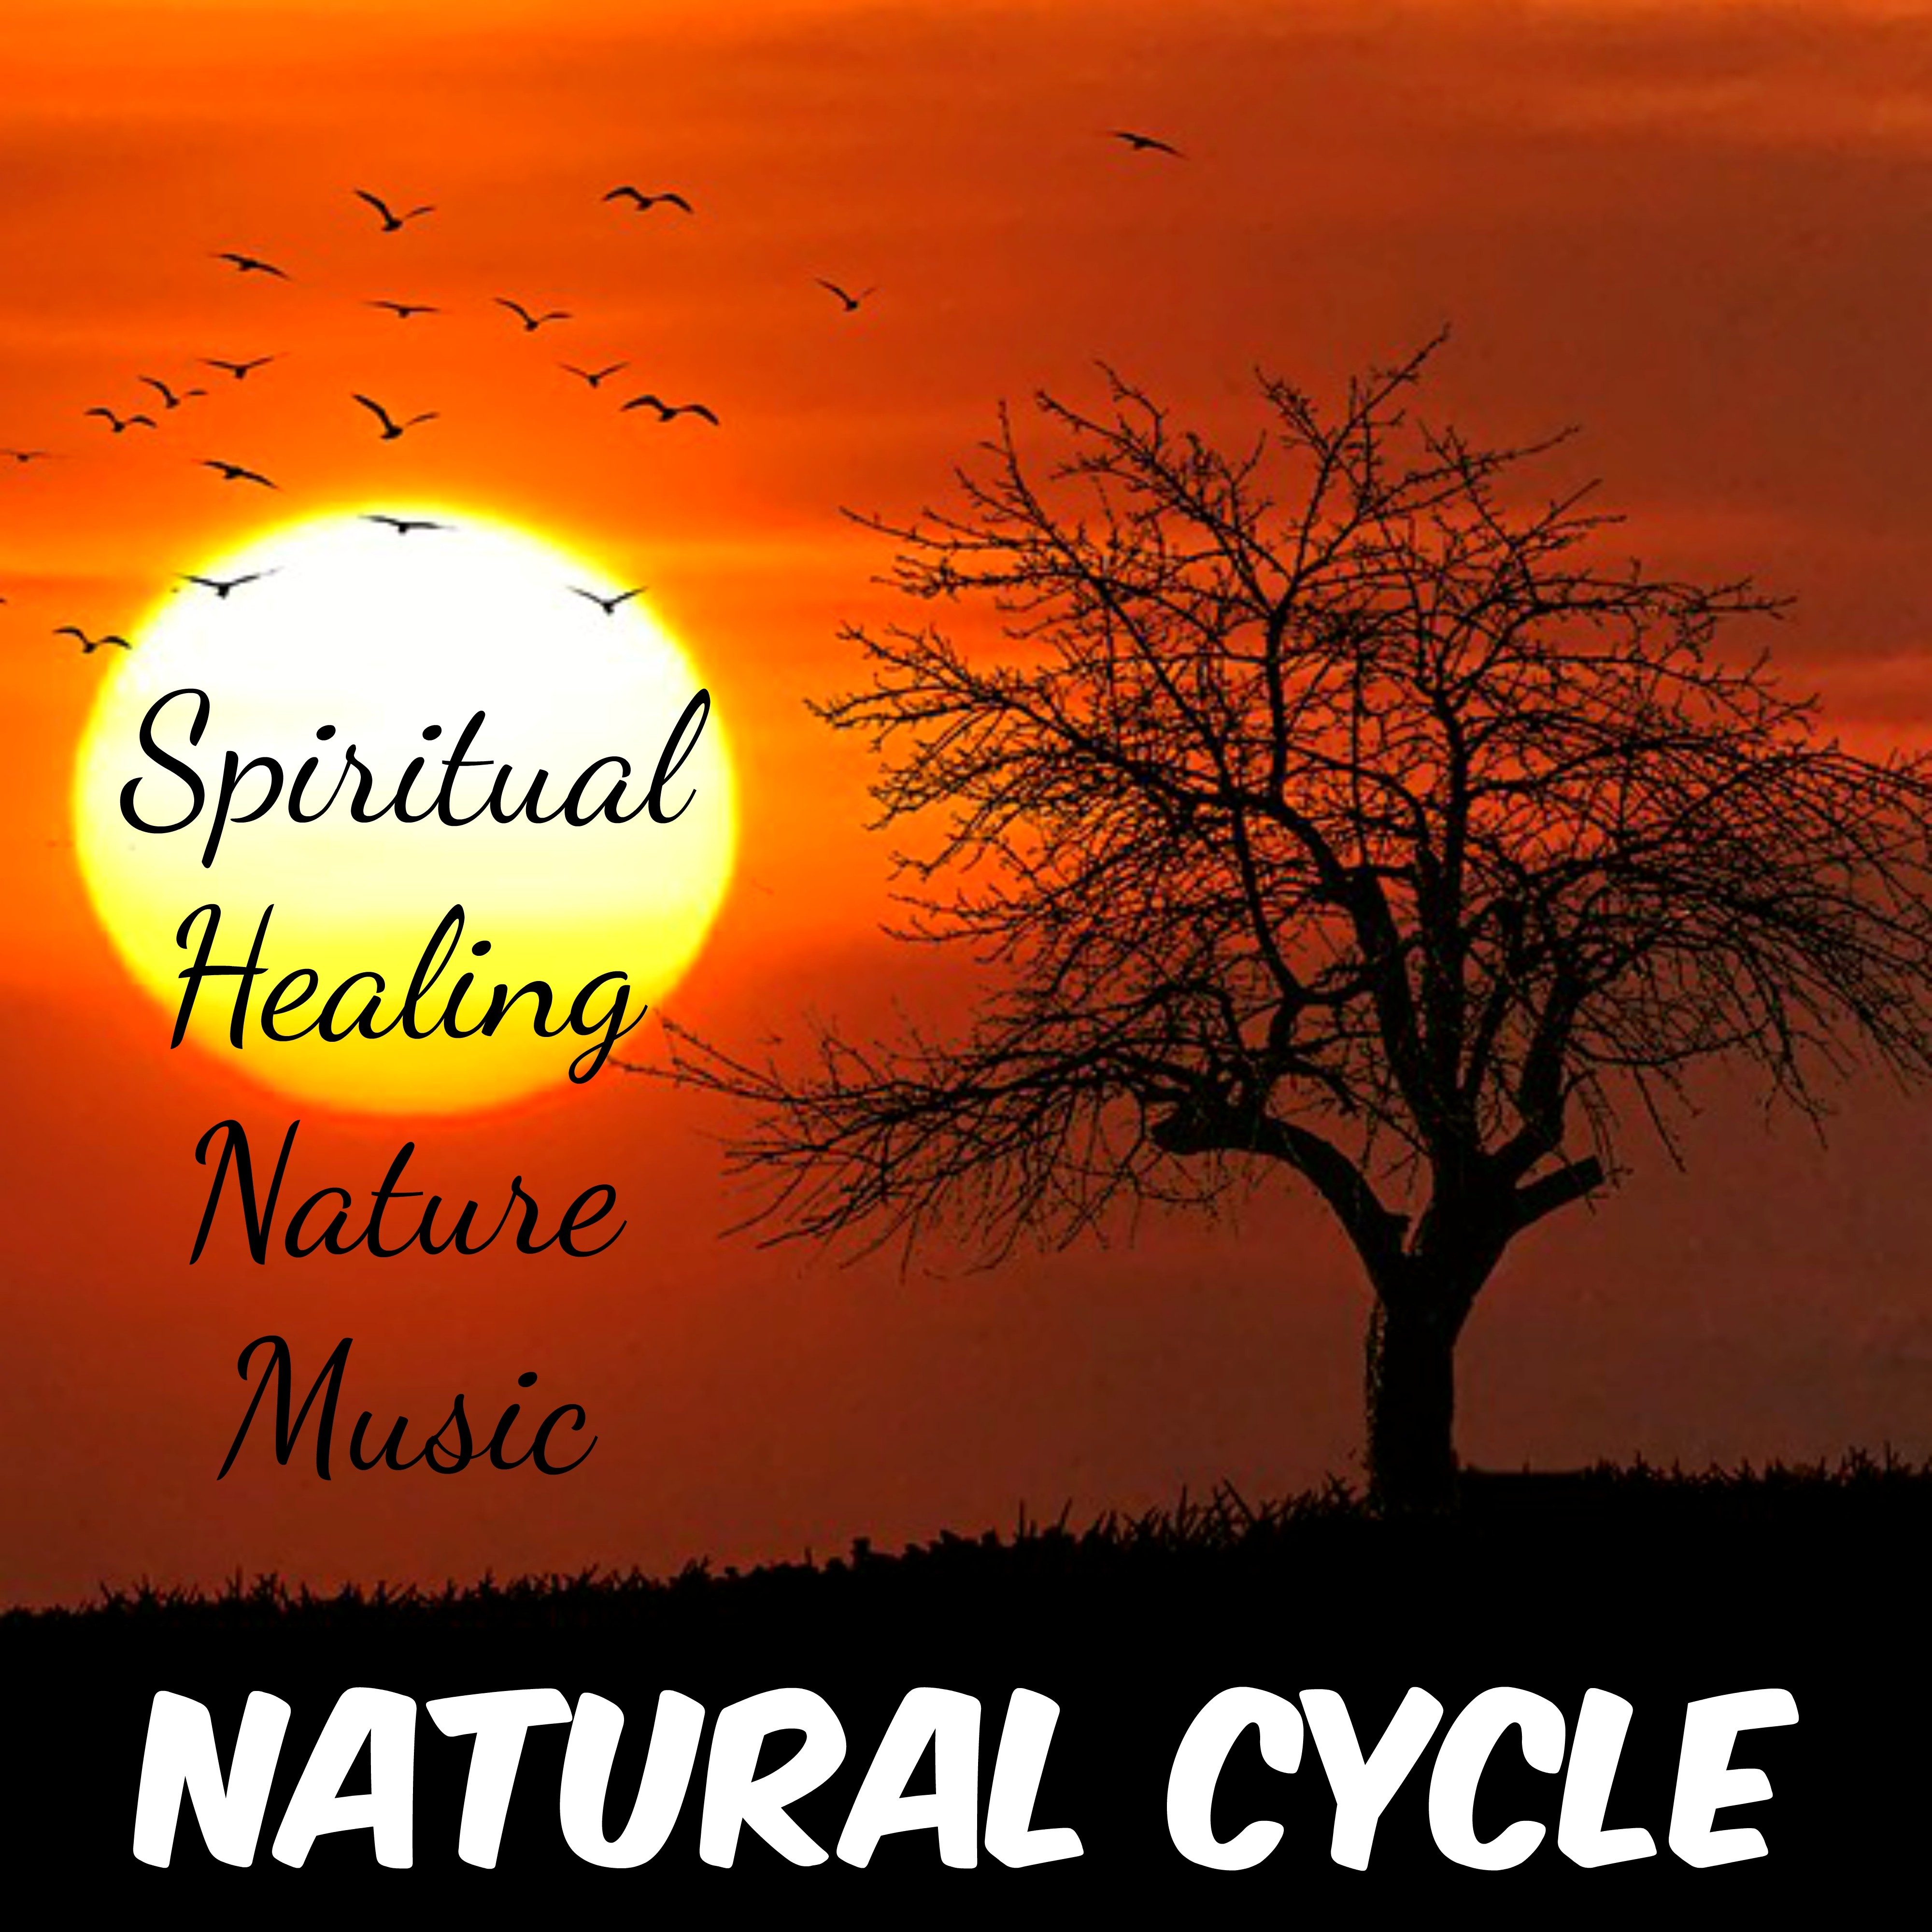 Natural Cycle - Spiritual Healing Nature Music for Relaxation Technique Chakra Meditation Yoga Routines with New Age Instrumental Binaural Sounds